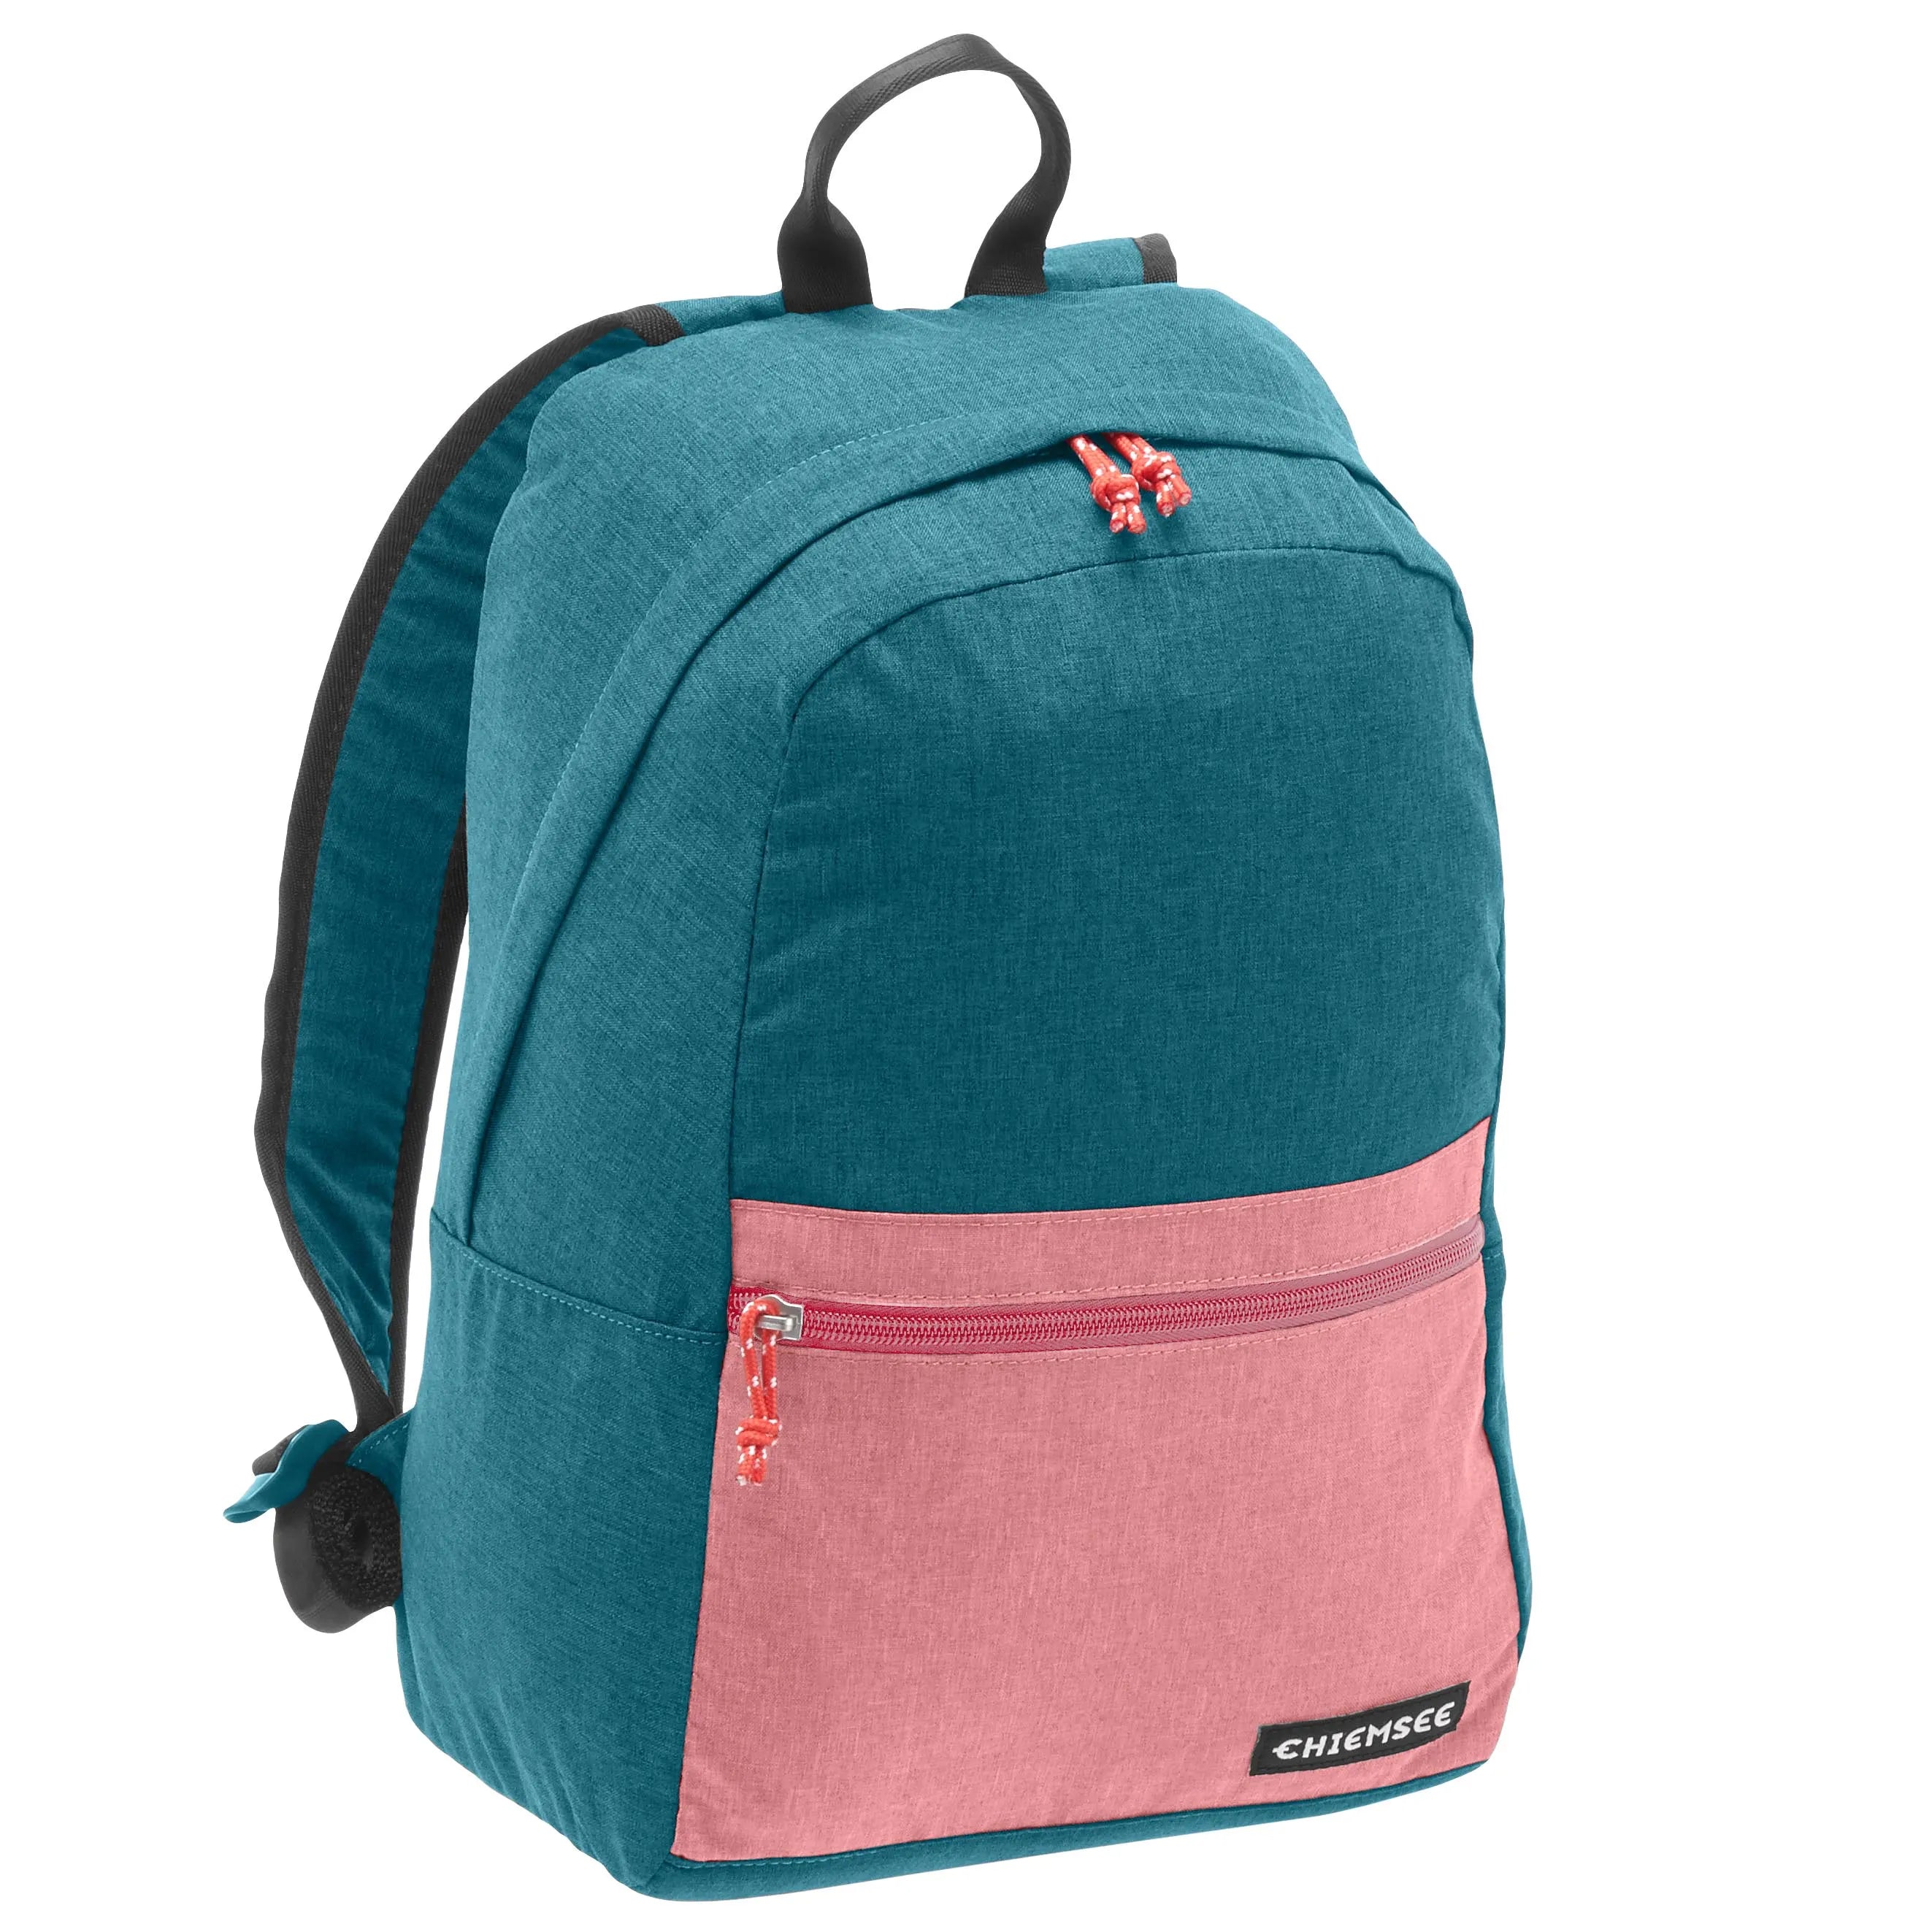 Chiemsee Sports & Travel Bags Easy Backpack 42 cm - coronet blue